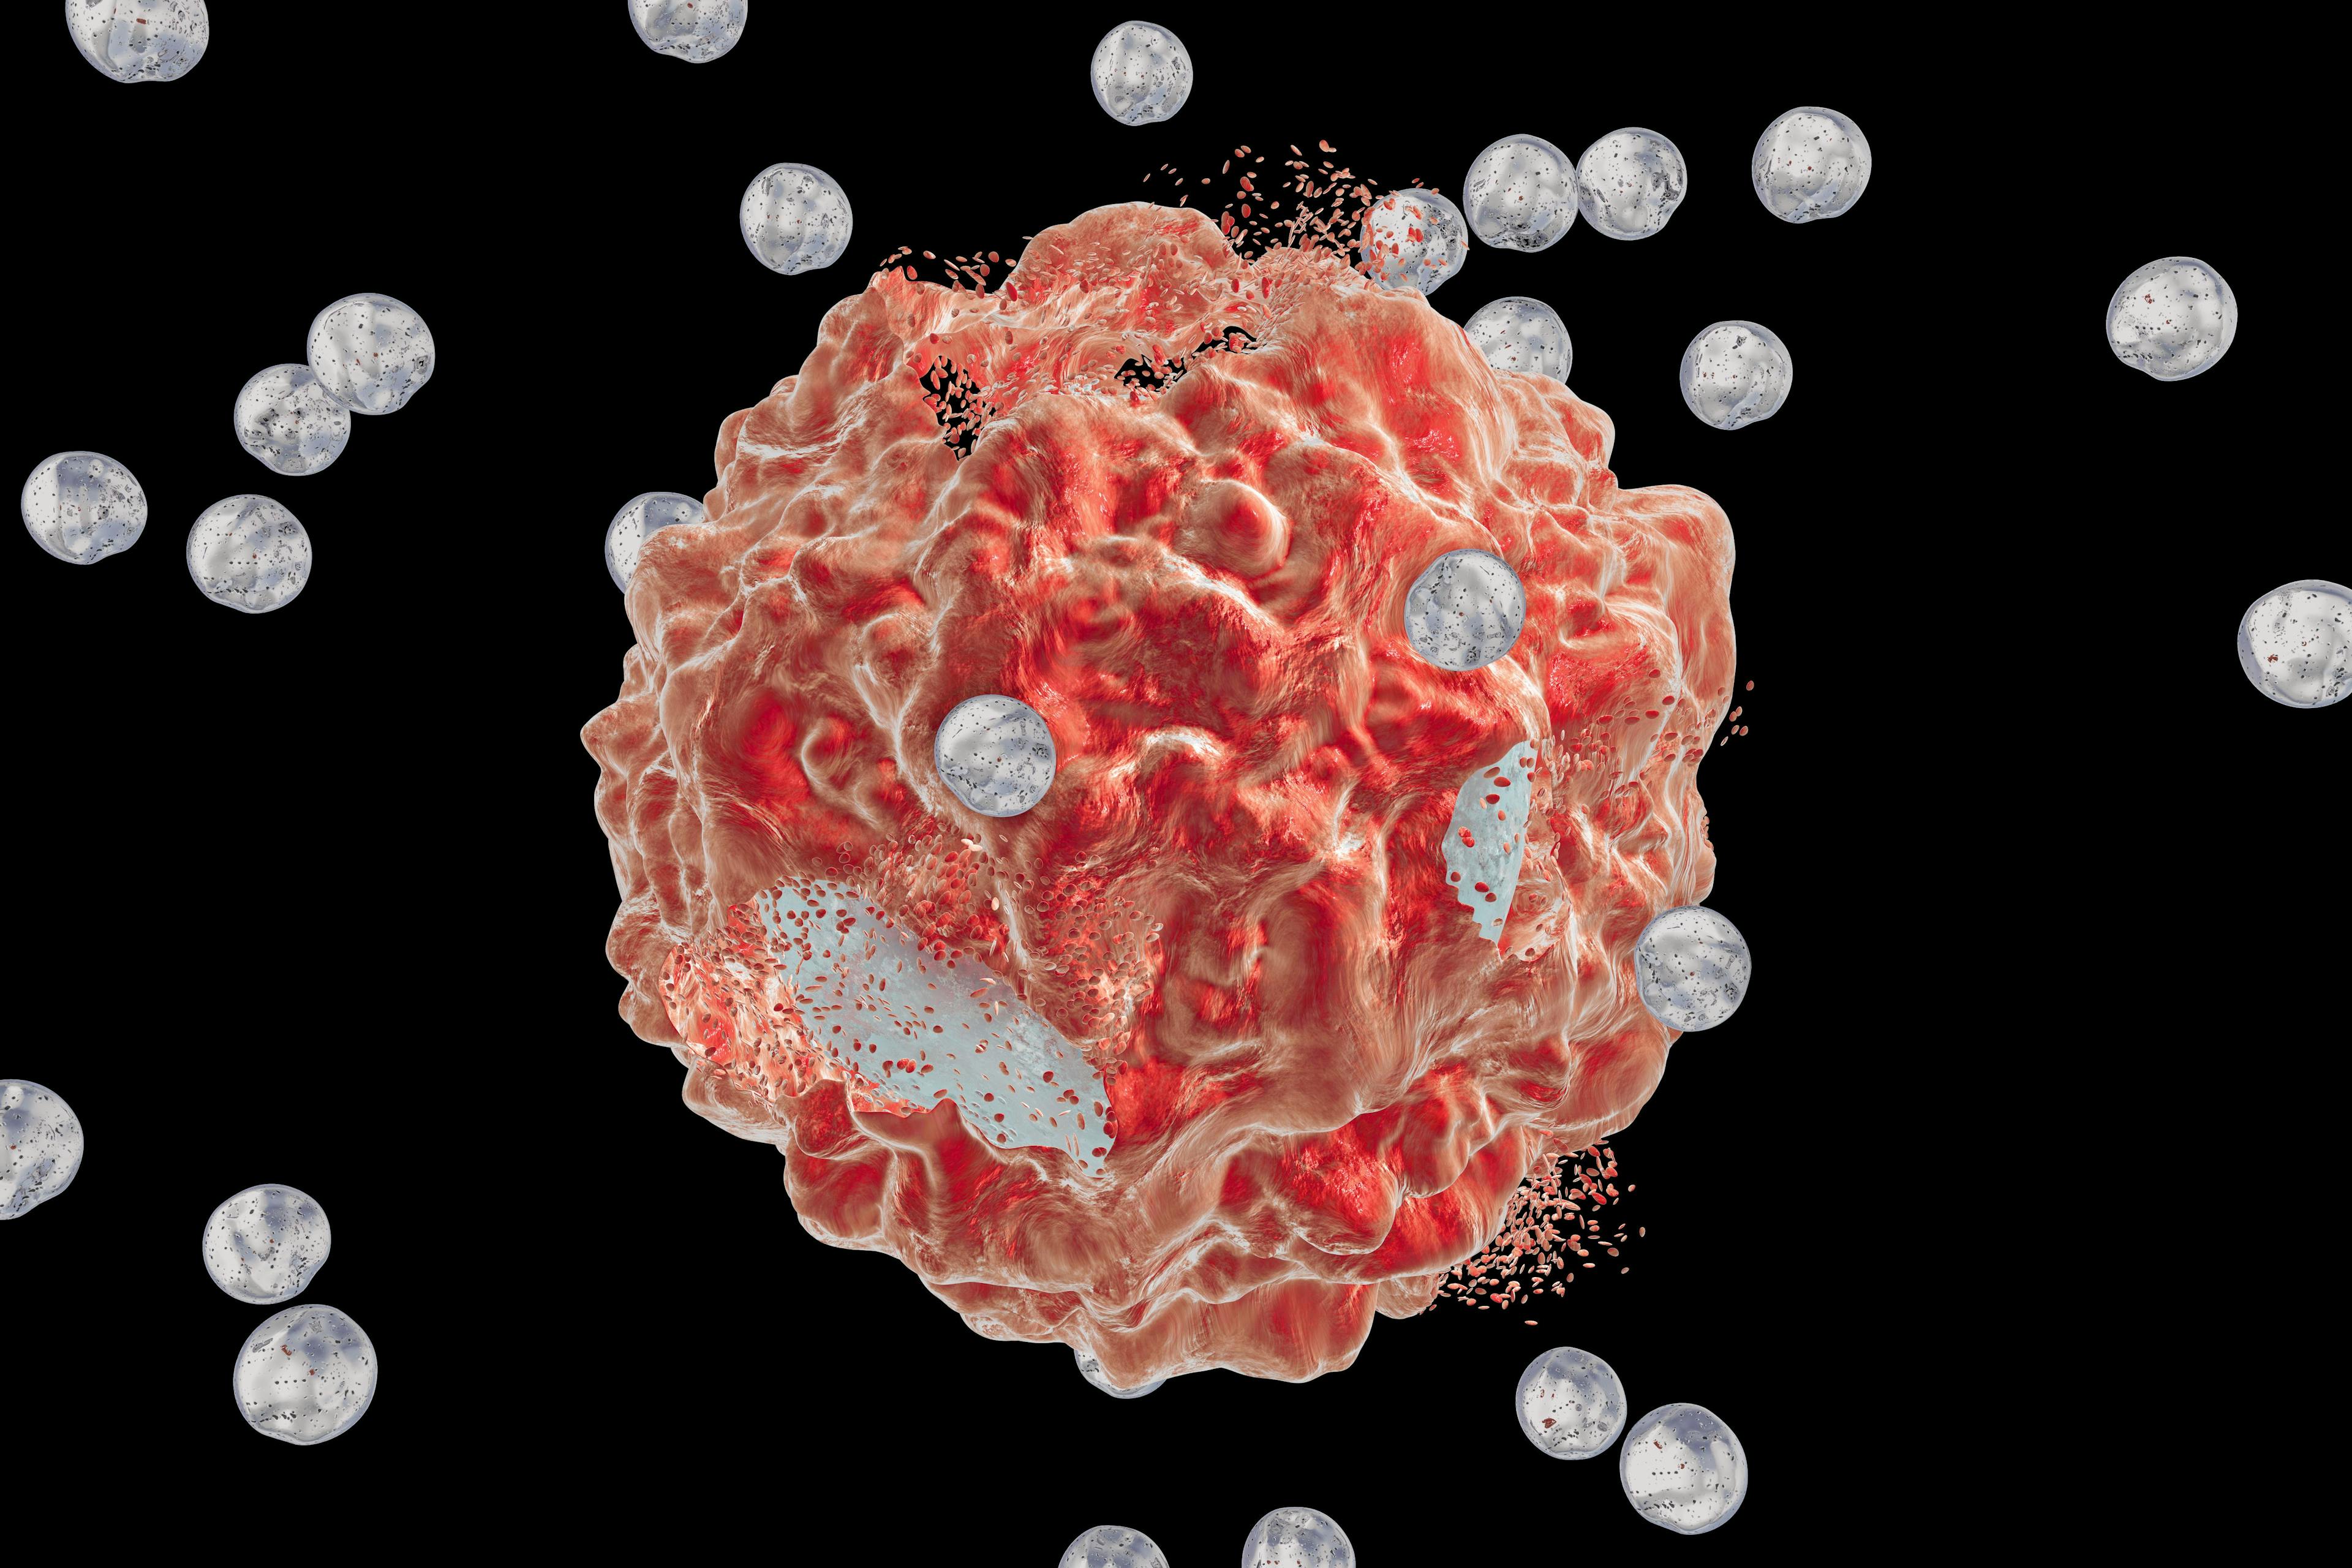 SOT101 With or Without Keytruda Shows Promise, Safety in Treating Advanced Solid Tumors